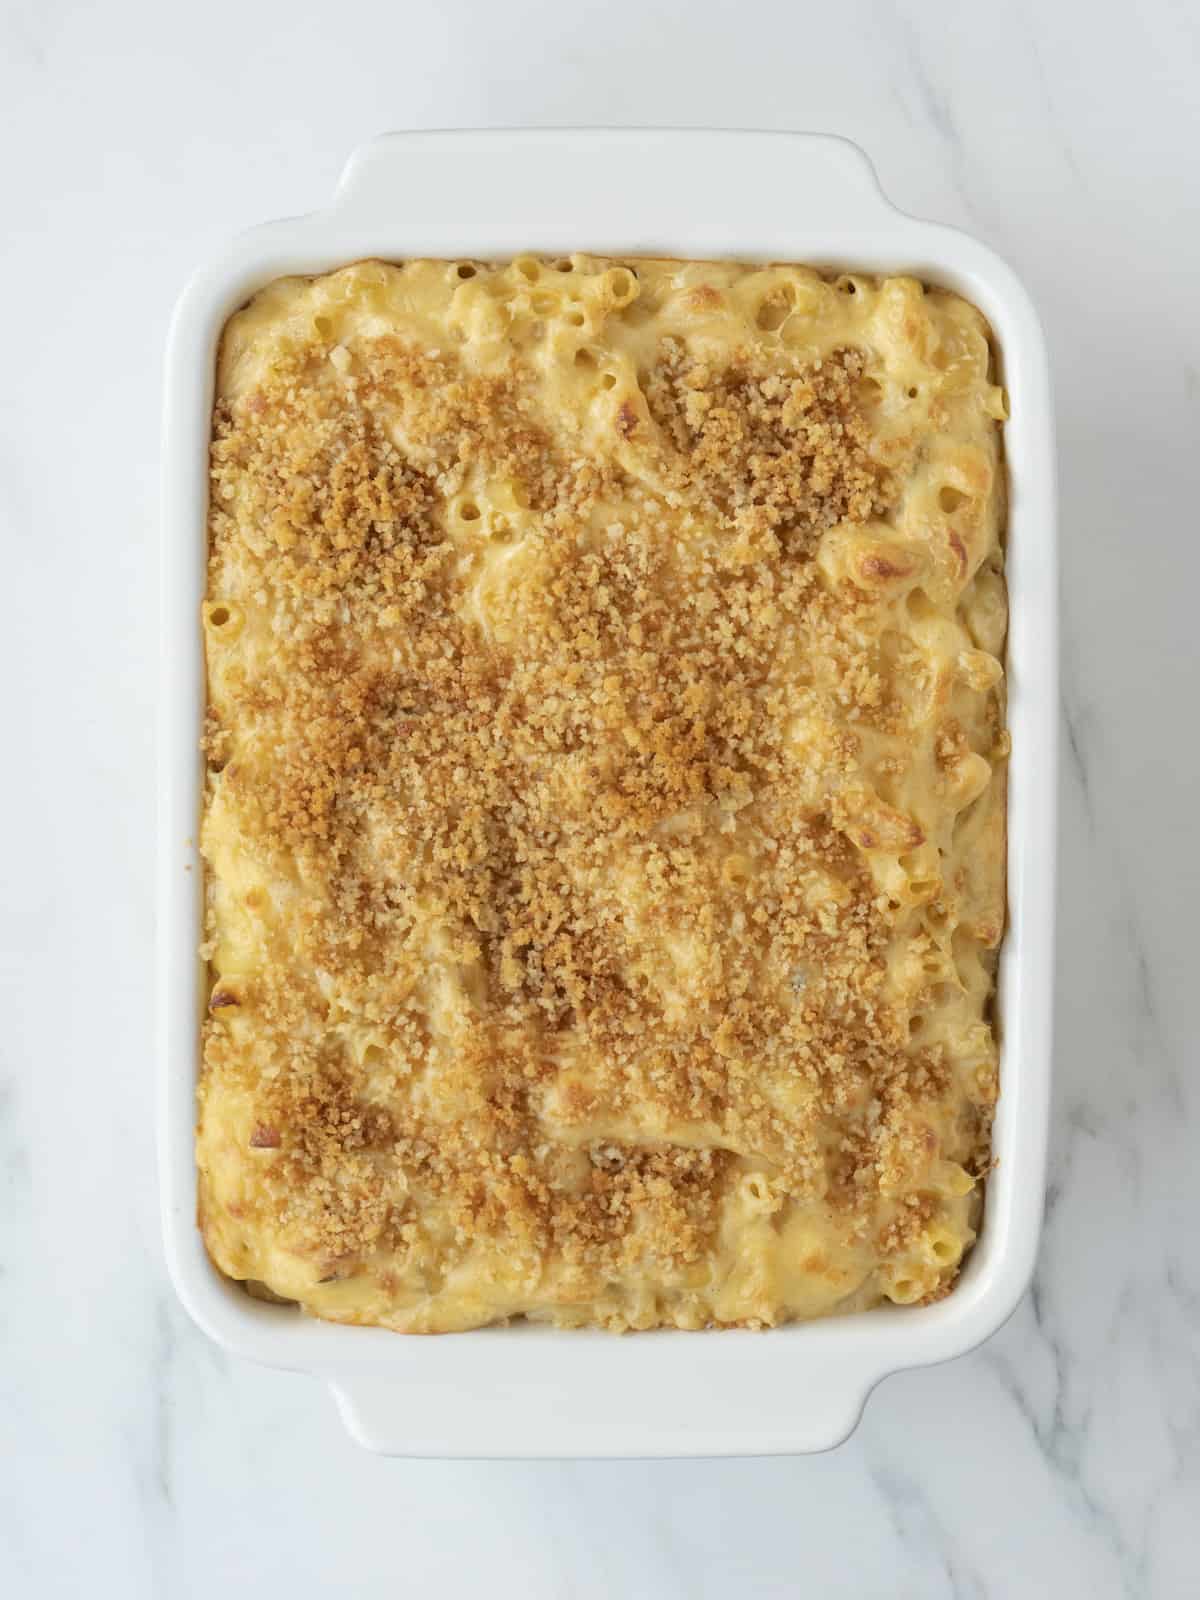 A large white baking dish with baked mac and cheese with panko breadcrumbs on top.